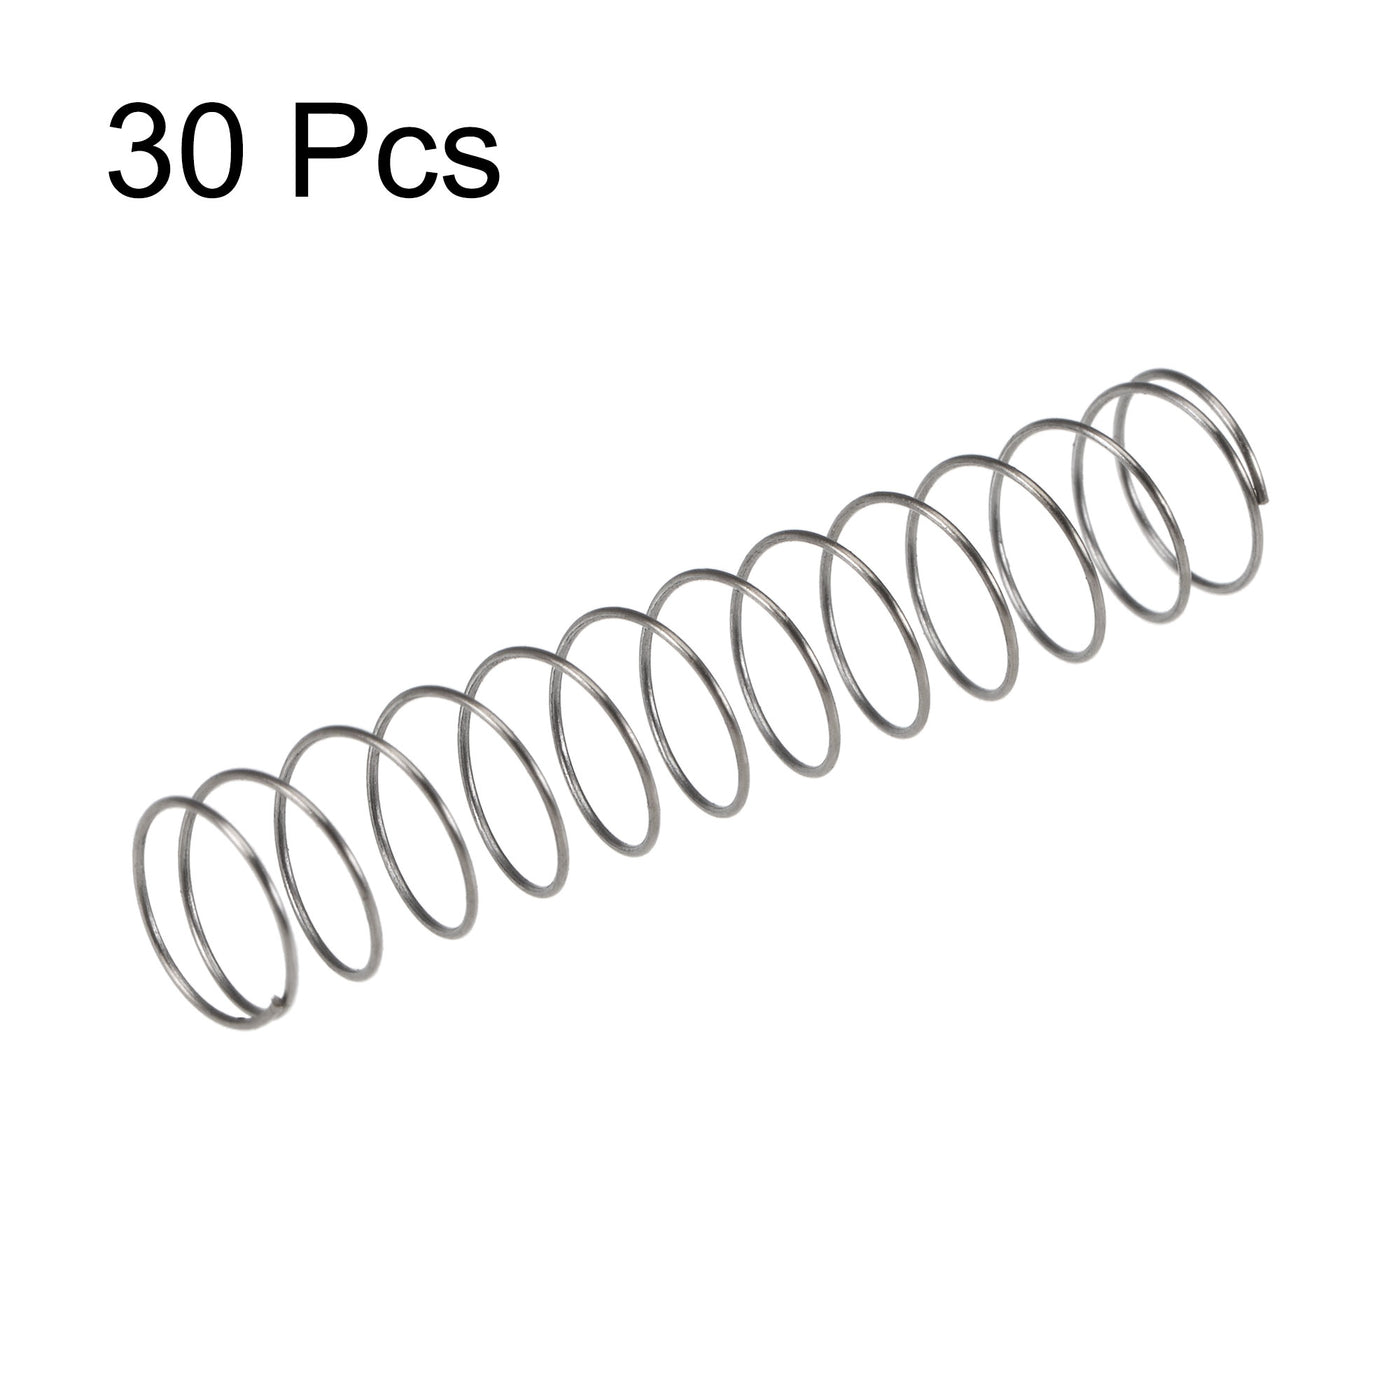 uxcell Uxcell Compressed Spring,8mmx0.4mmx40mm Free Length,1.1N Load Capacity,Gray,30pcs